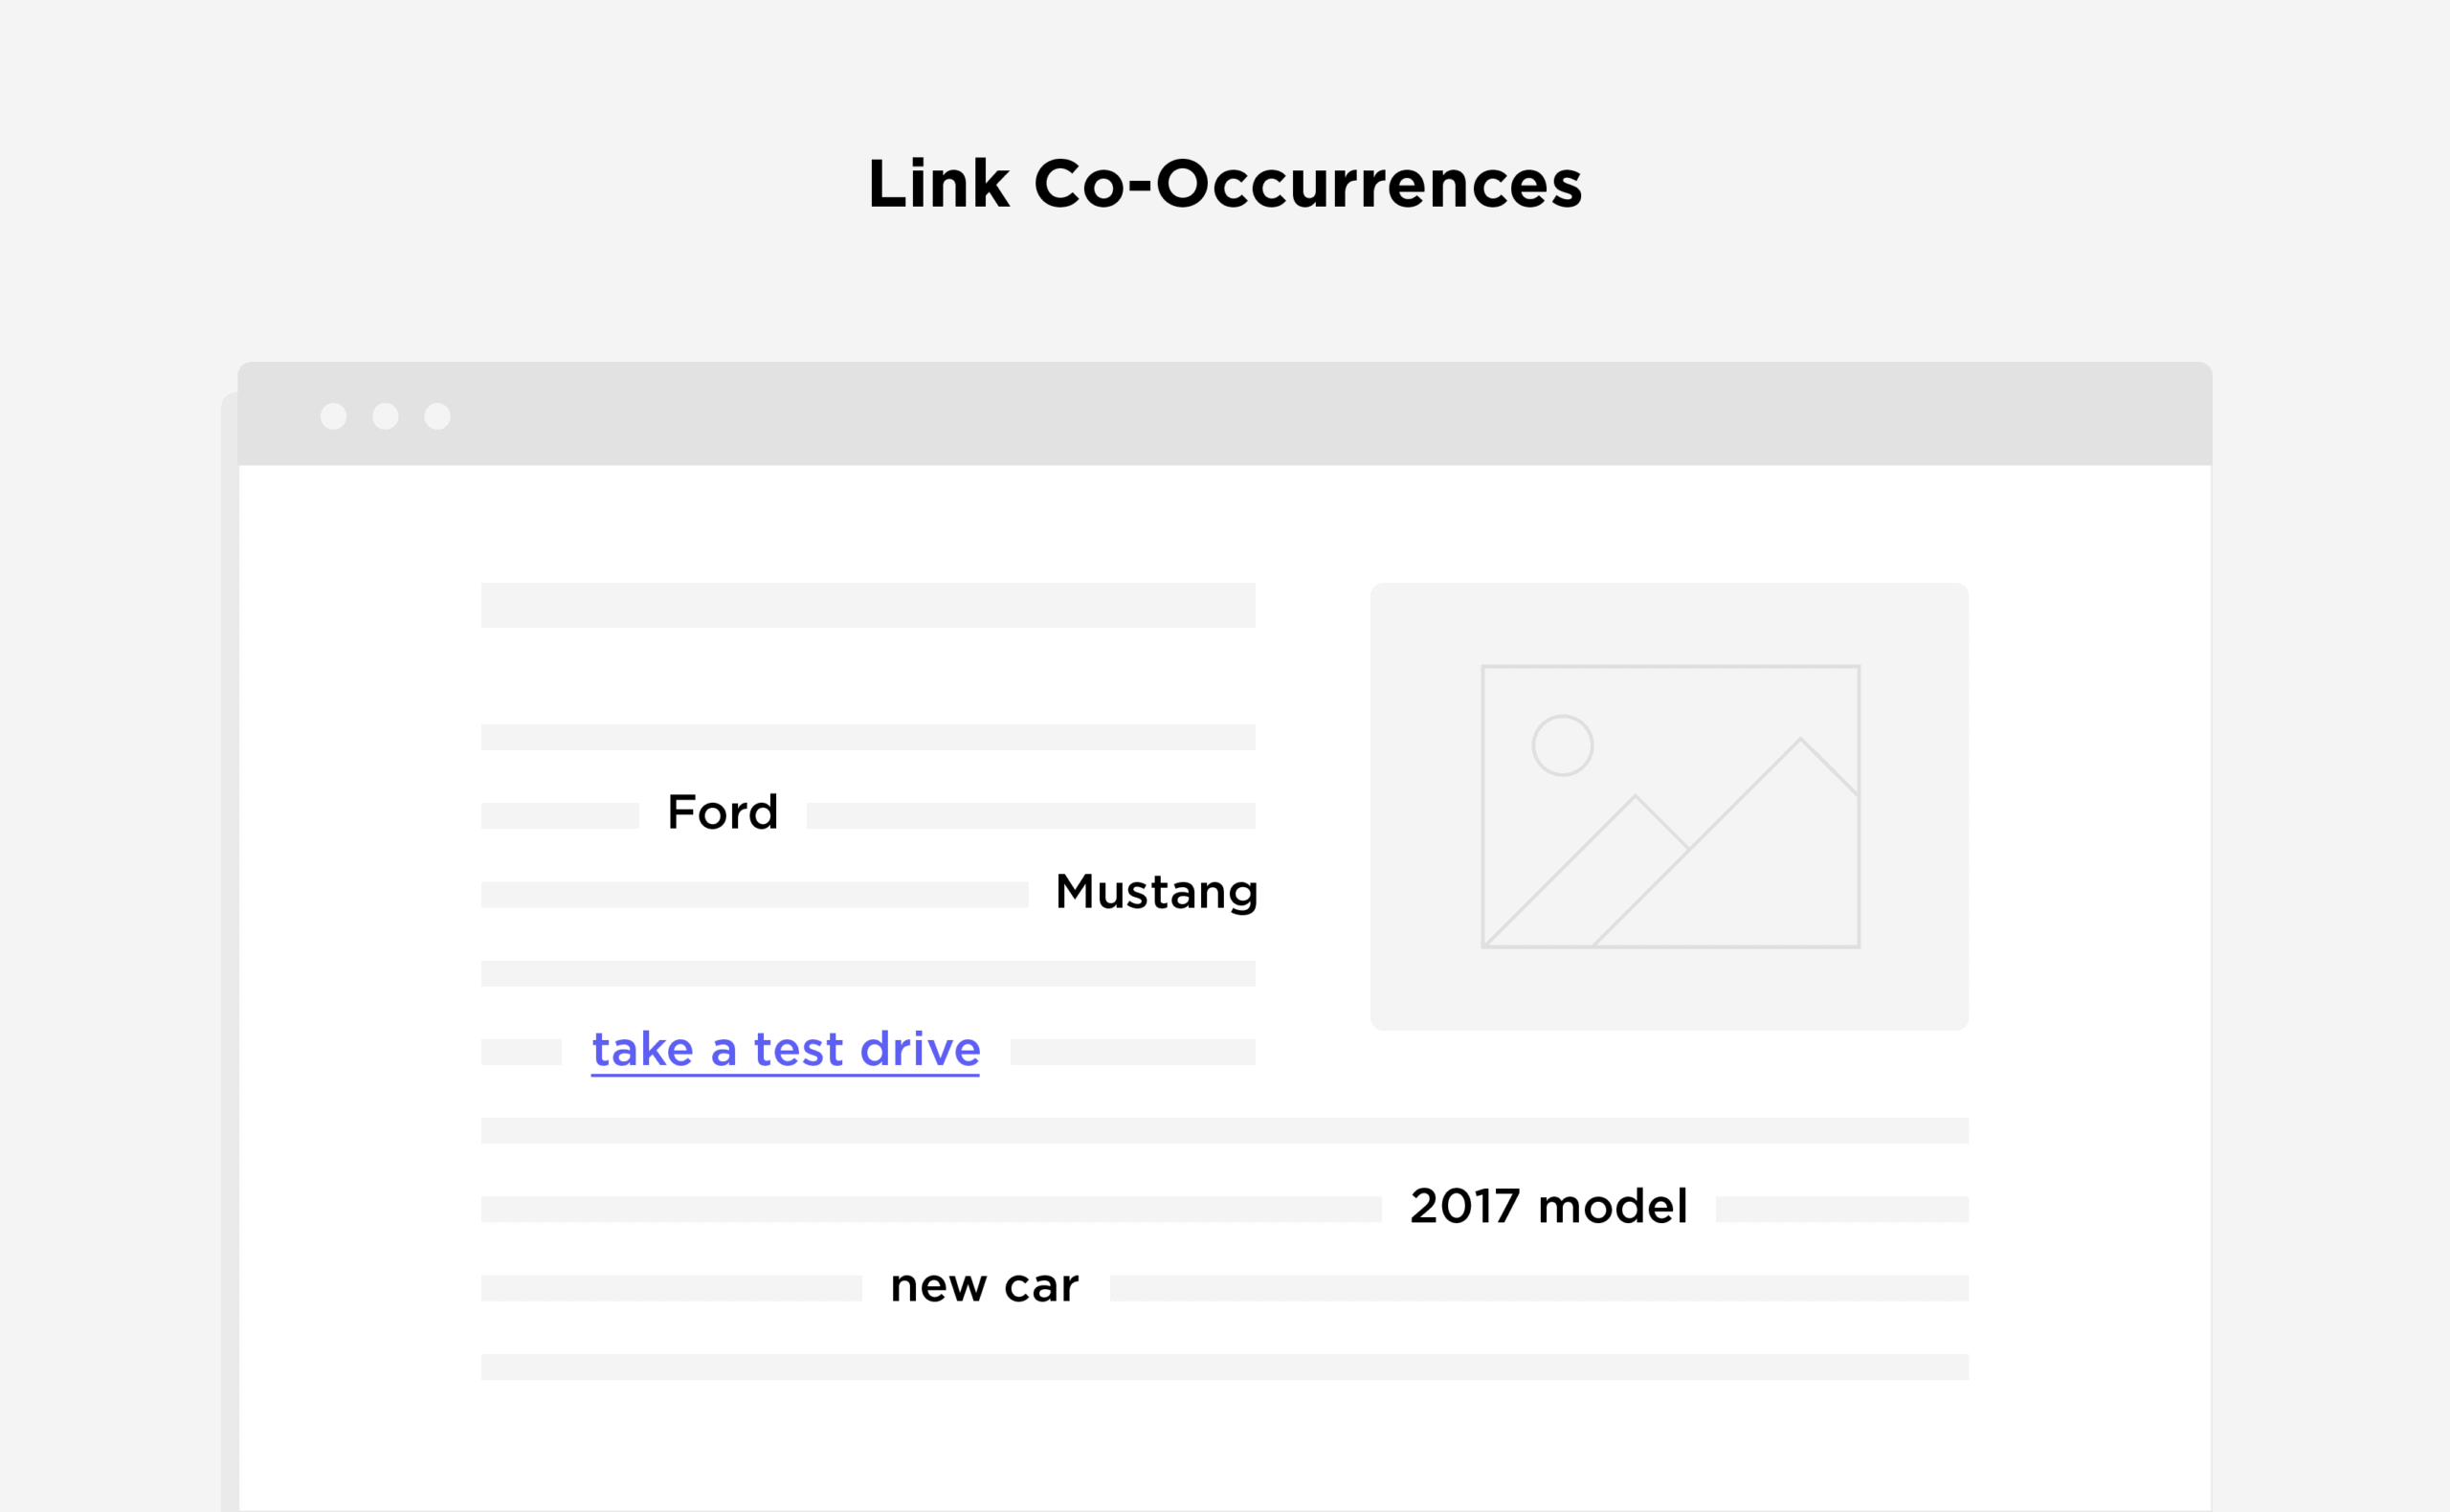 Link Co-Occurrences